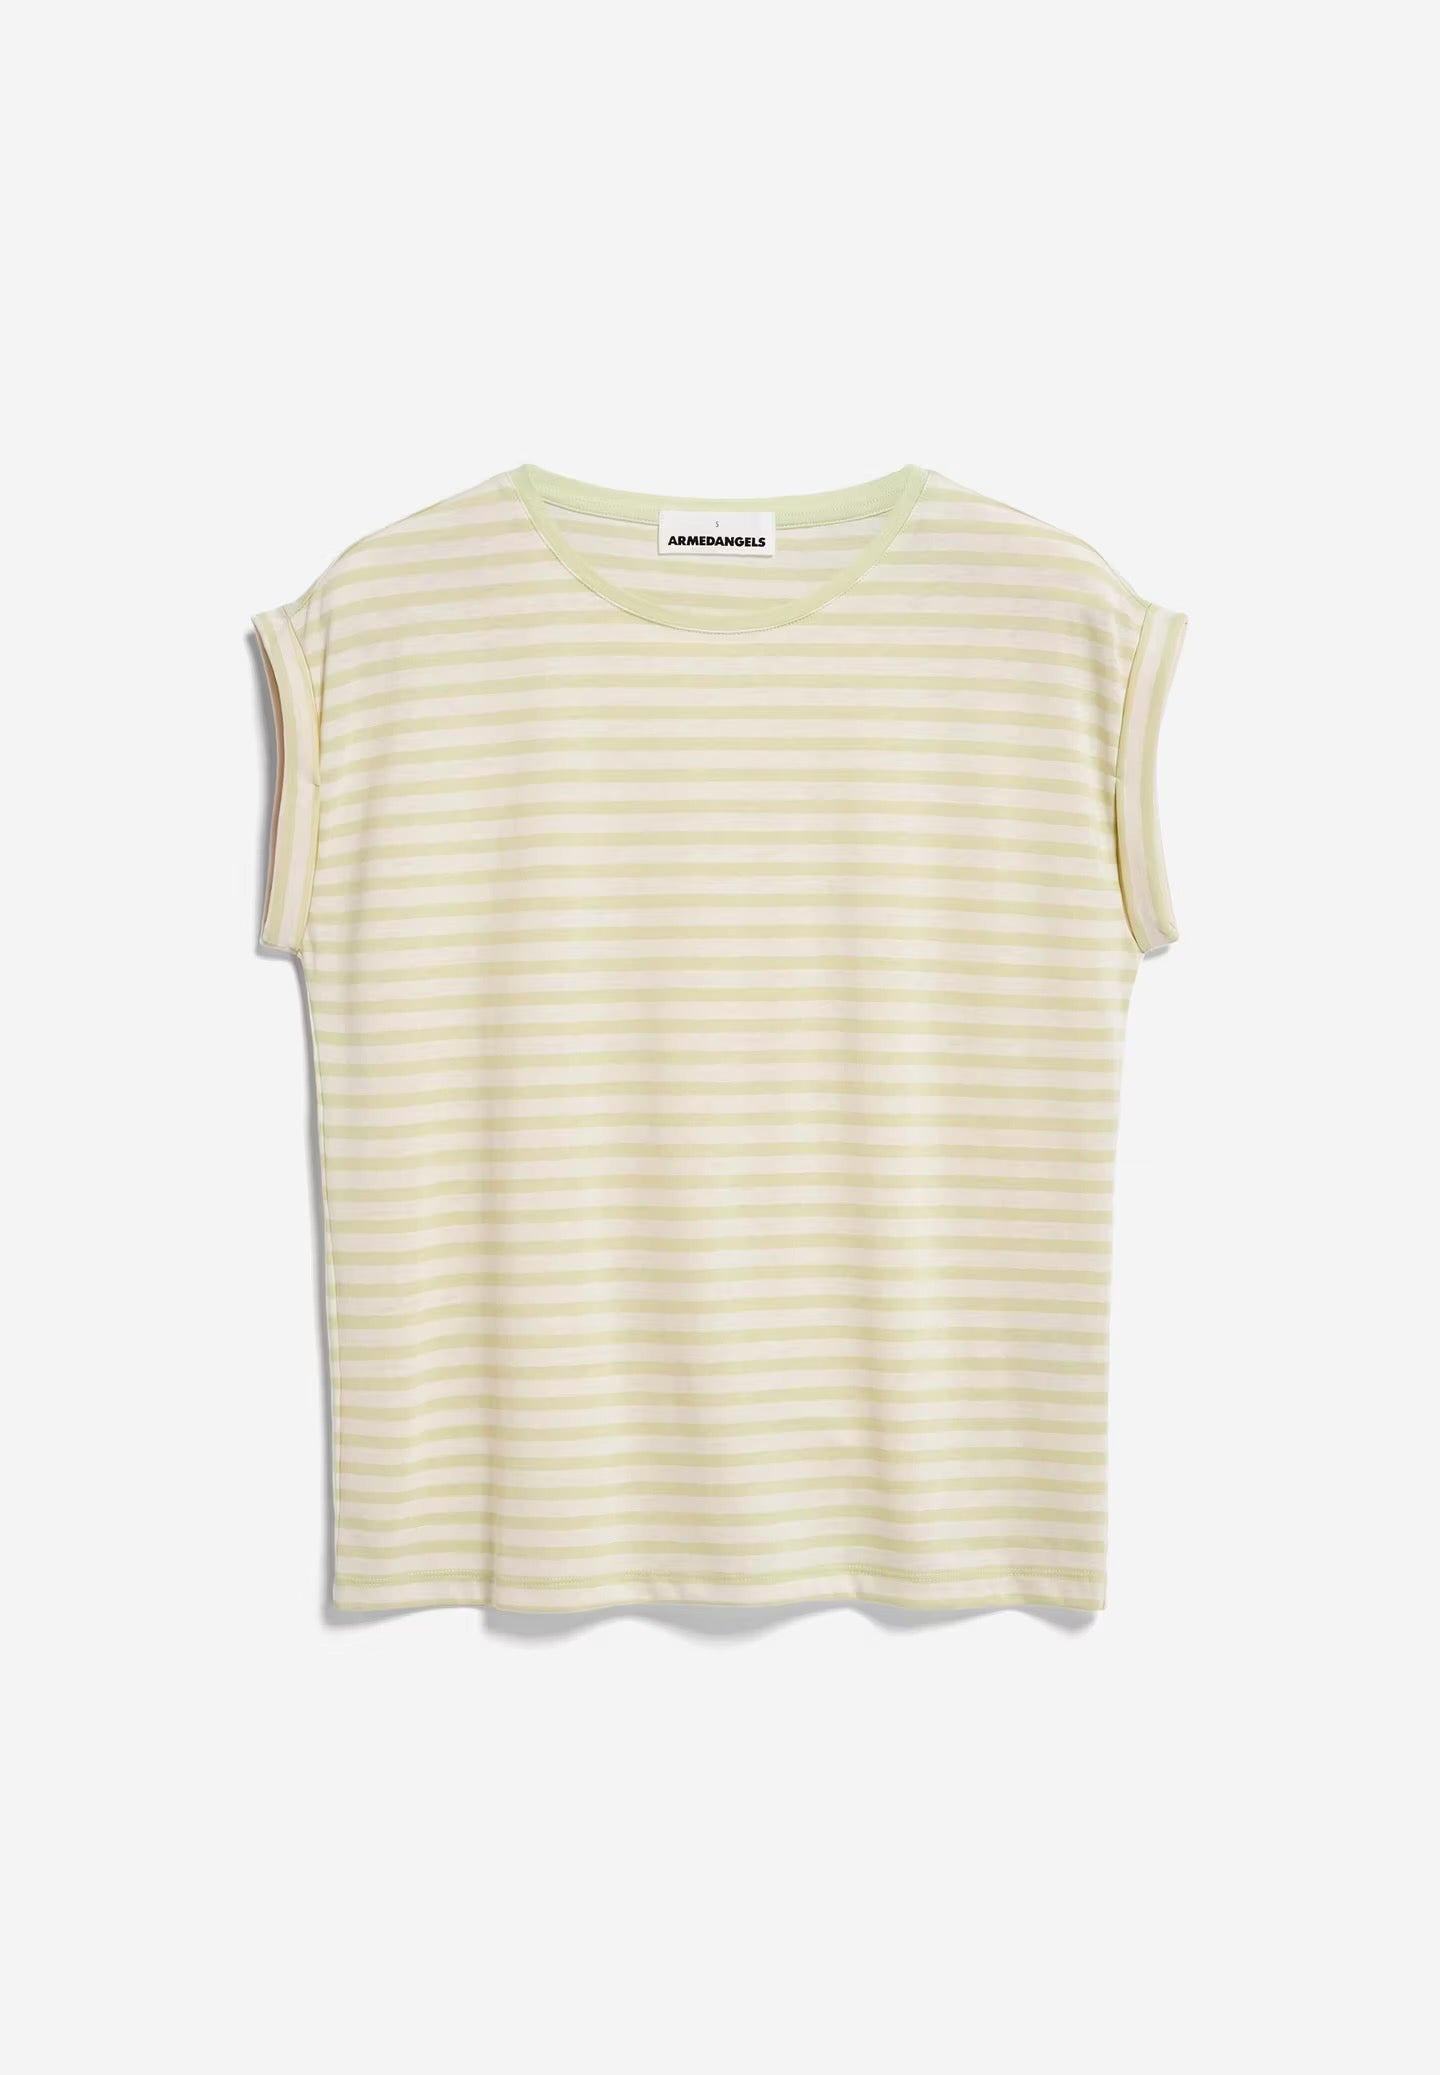 Relaxed fit cap sleeve striped t-shirt by ARMEDANGELS, made from a sustainable TENCEL™ and organic cotton mix. Fine horizontal stripes in pastel green and oat milk white.